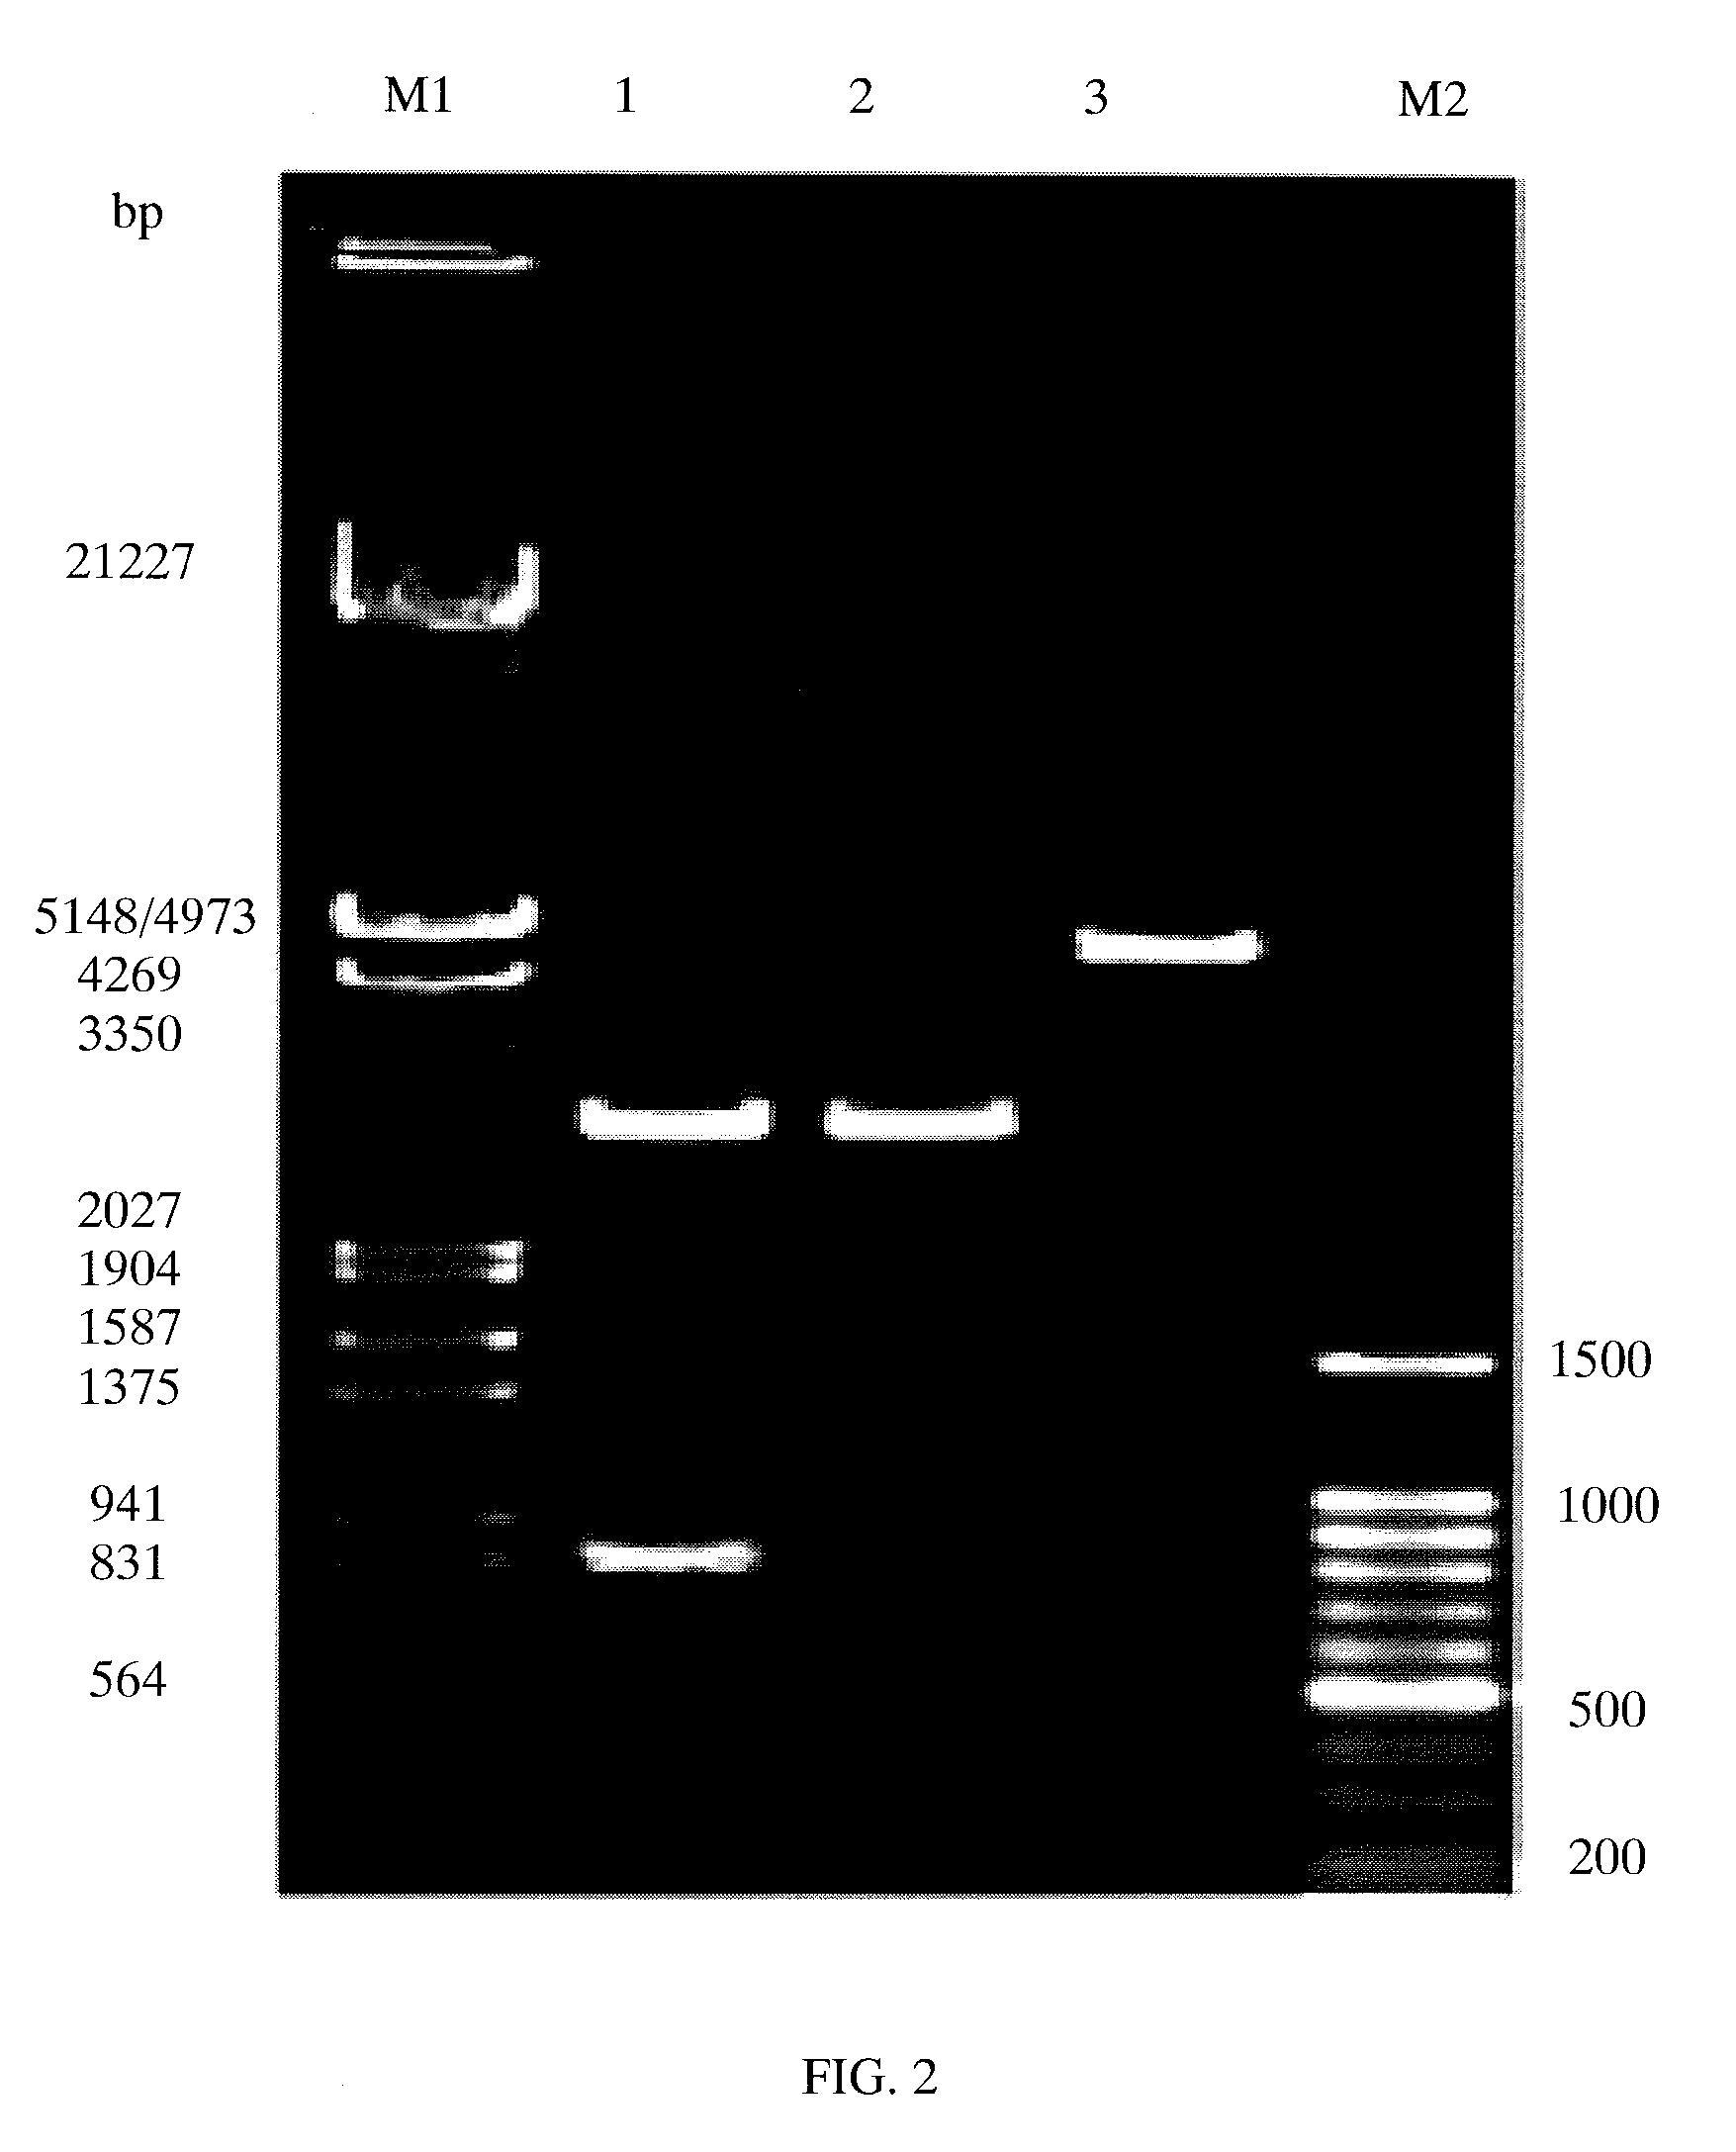 Recombinant chimeric protein of neutrophil inhibitory factor and hirugen, and pharmaceutical composition thereof